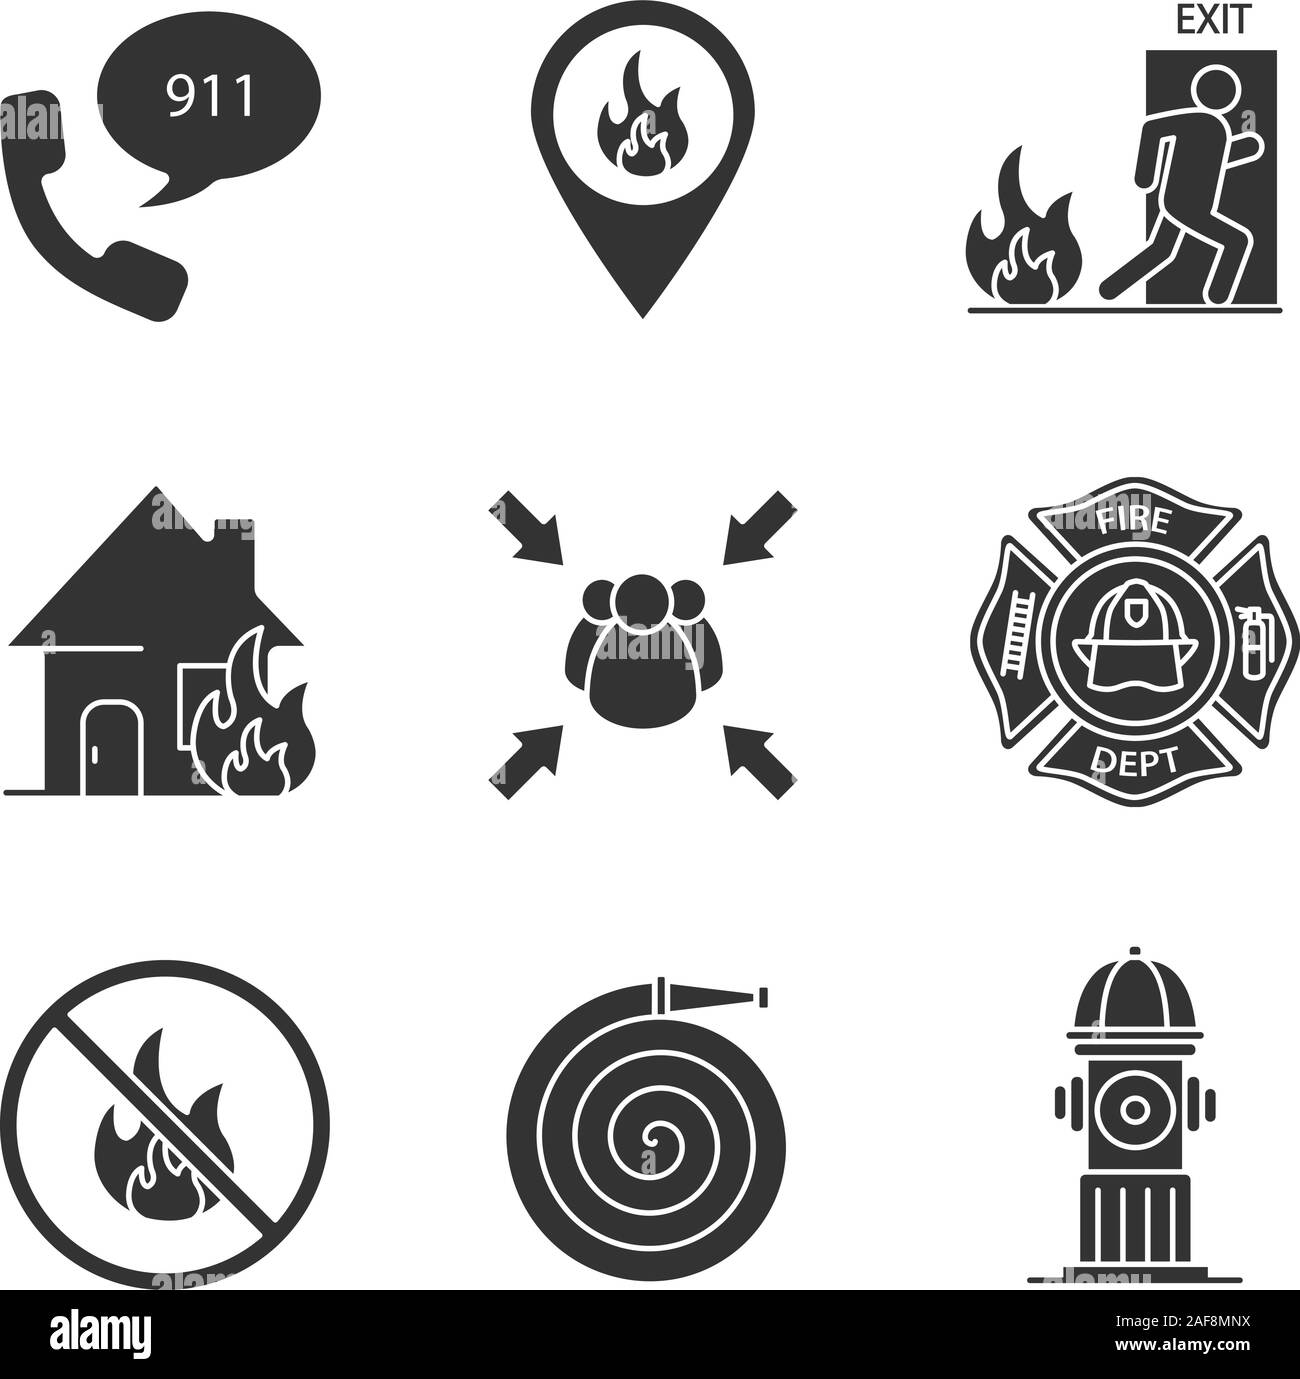 Firefighting glyph icons set. Emergency call, fire location, evacuation, burning house, assembly point, bonfire prohibition, badge, hydrant, hose. Sil Stock Vector